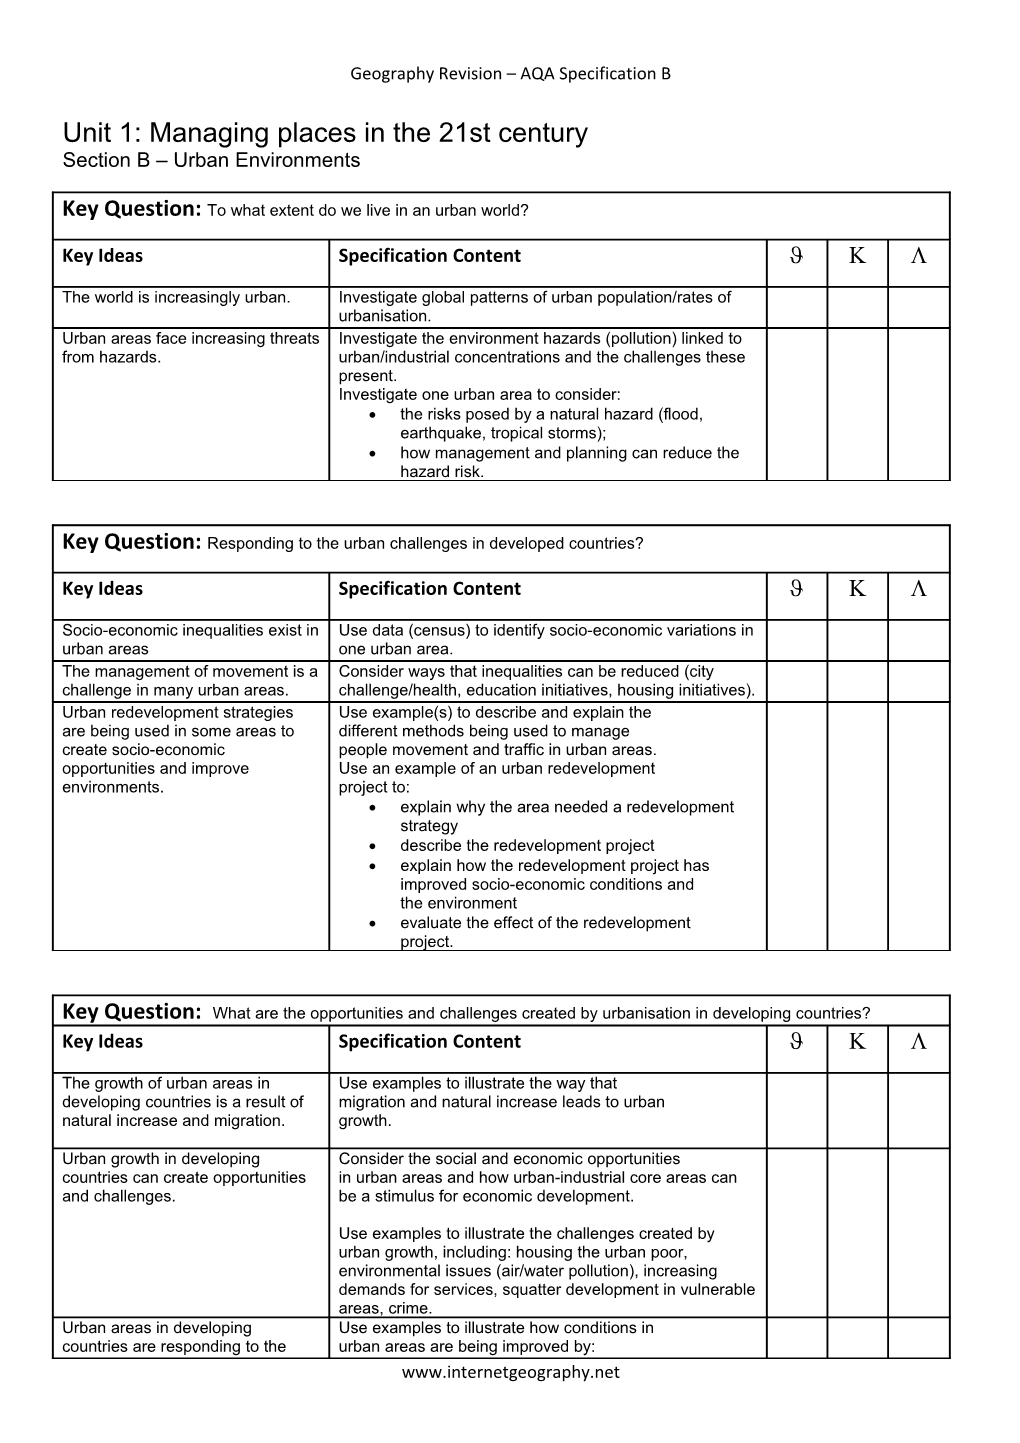 Geography Revision AQA Specification B